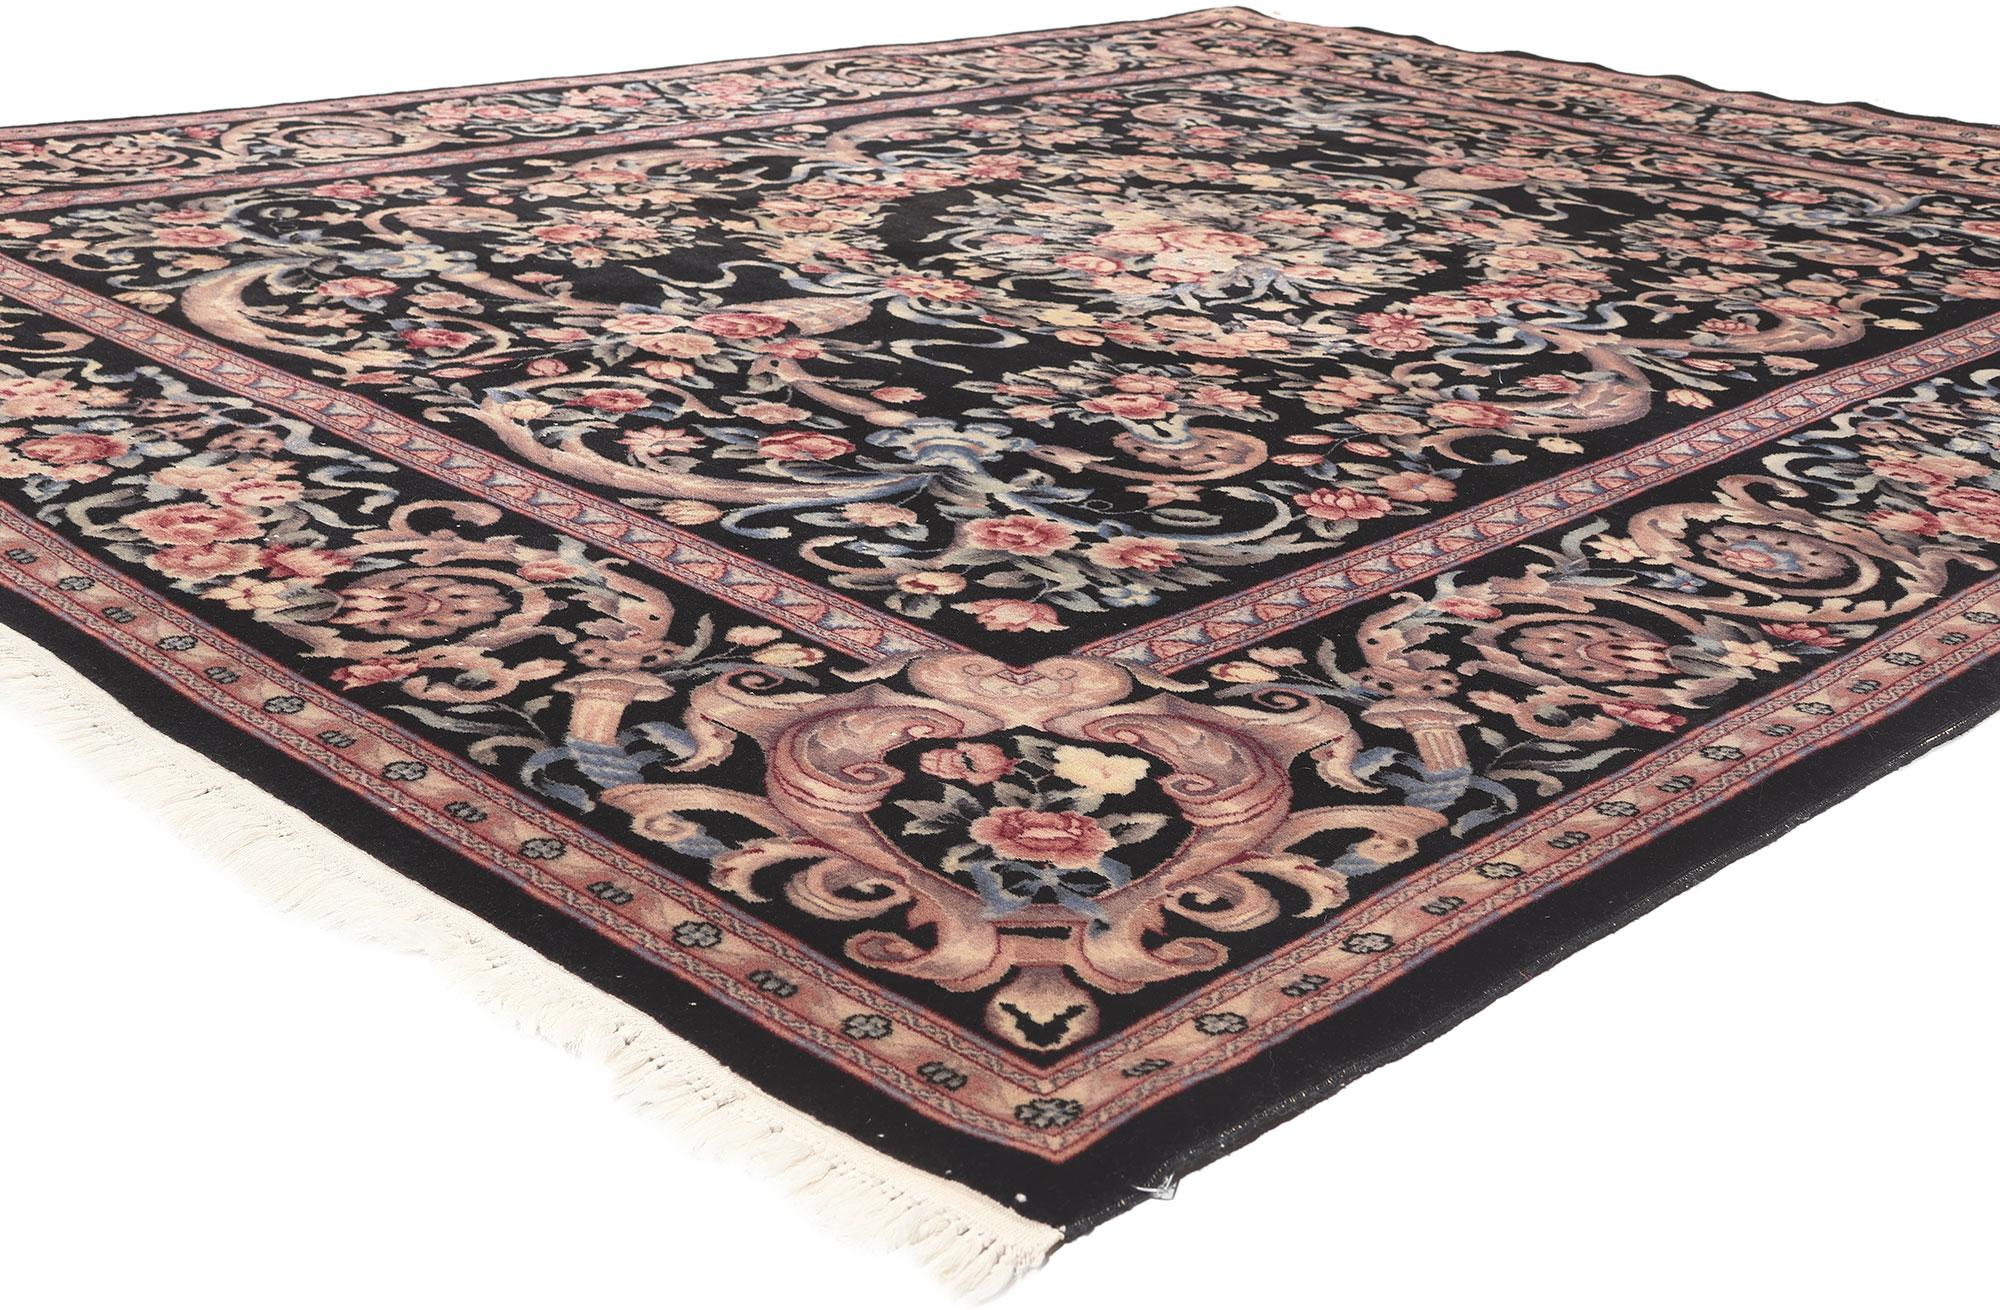 78647 Vintage French Aubusson Style Rug, 07'06 x 09'08.
Drawing inspiration from Mario Buatta and Chintz style, this hand-knotted wool vintage Aubusson style garden area rug features the full blossoms of flower garlands similar to those found in the